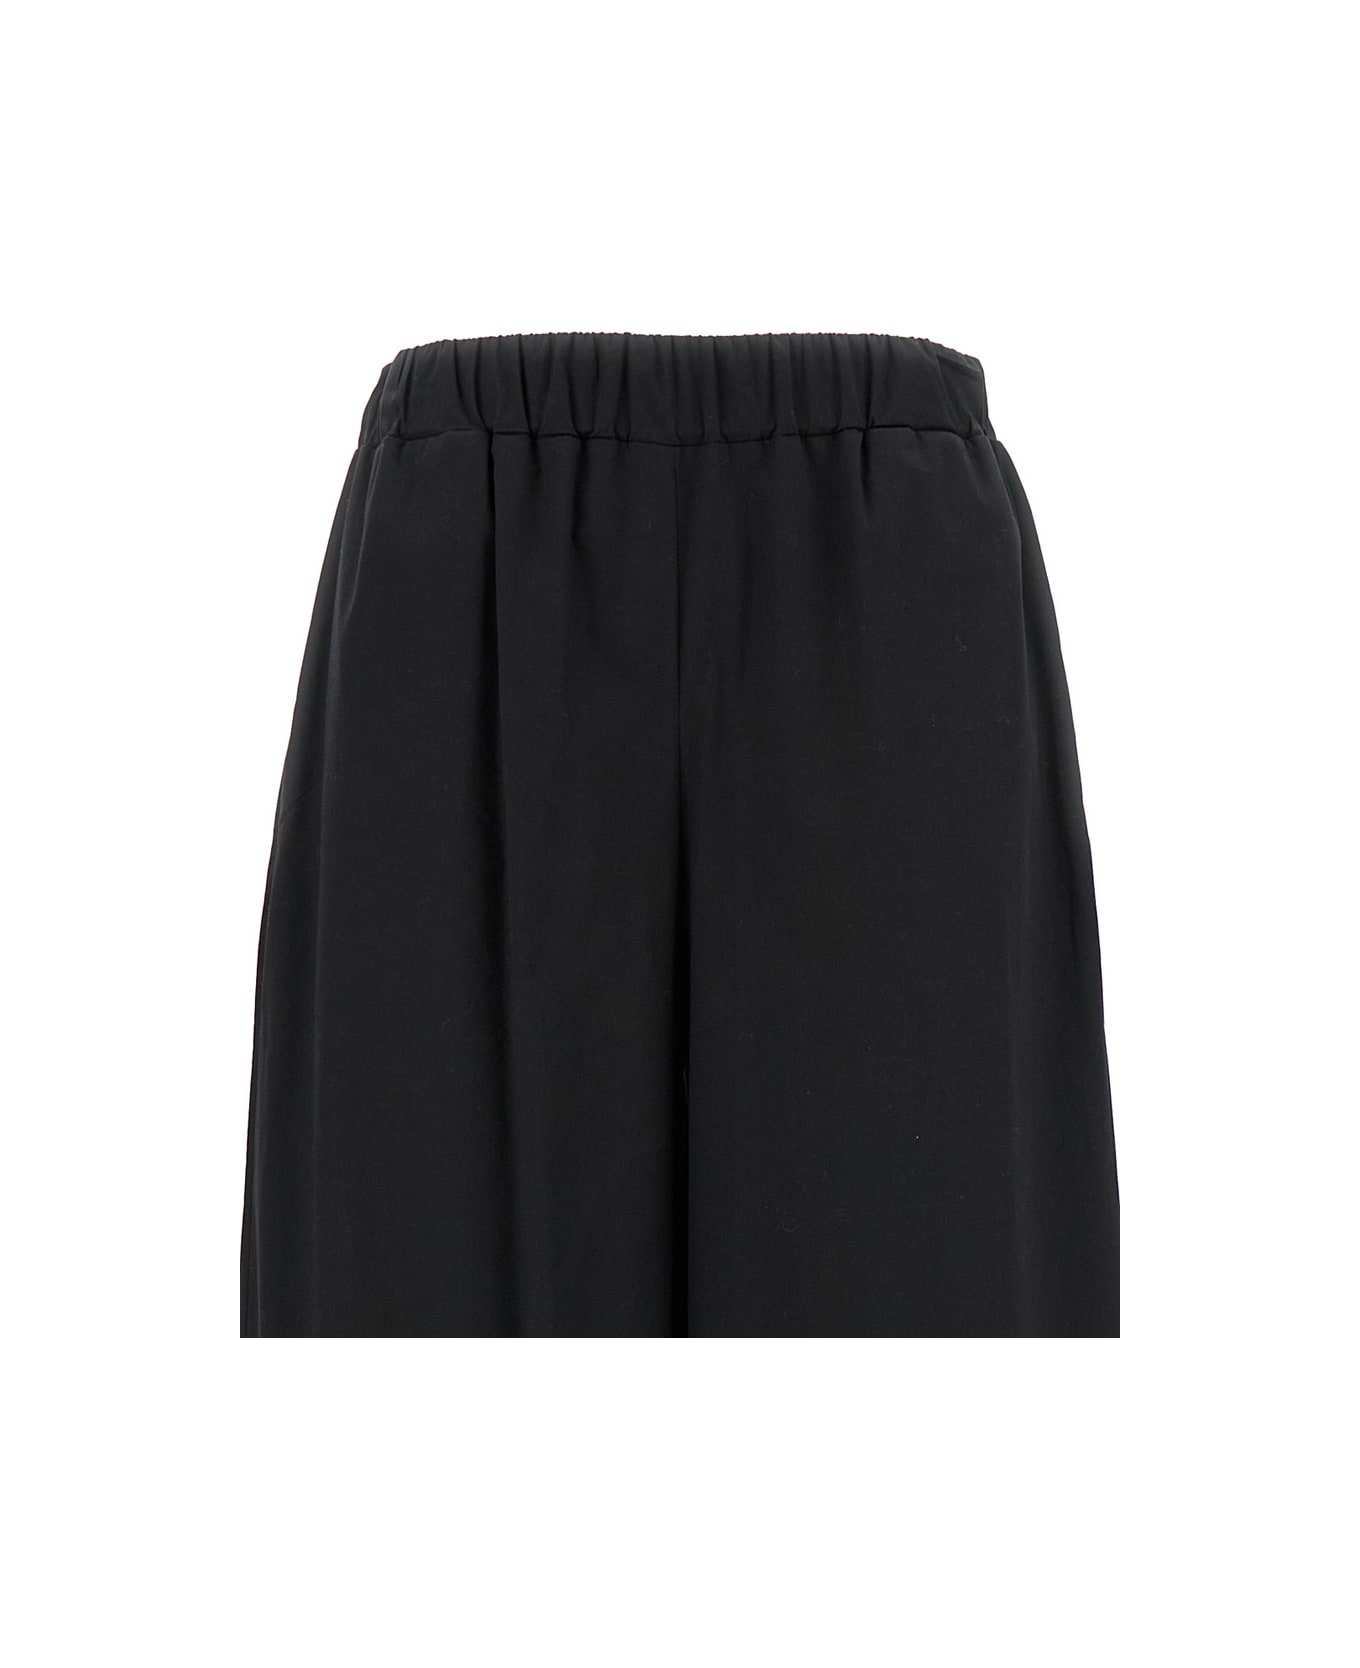 Federica Tosi Black Elastic High-waisted Pants In Stretch Cotton Woman - Black ボトムス